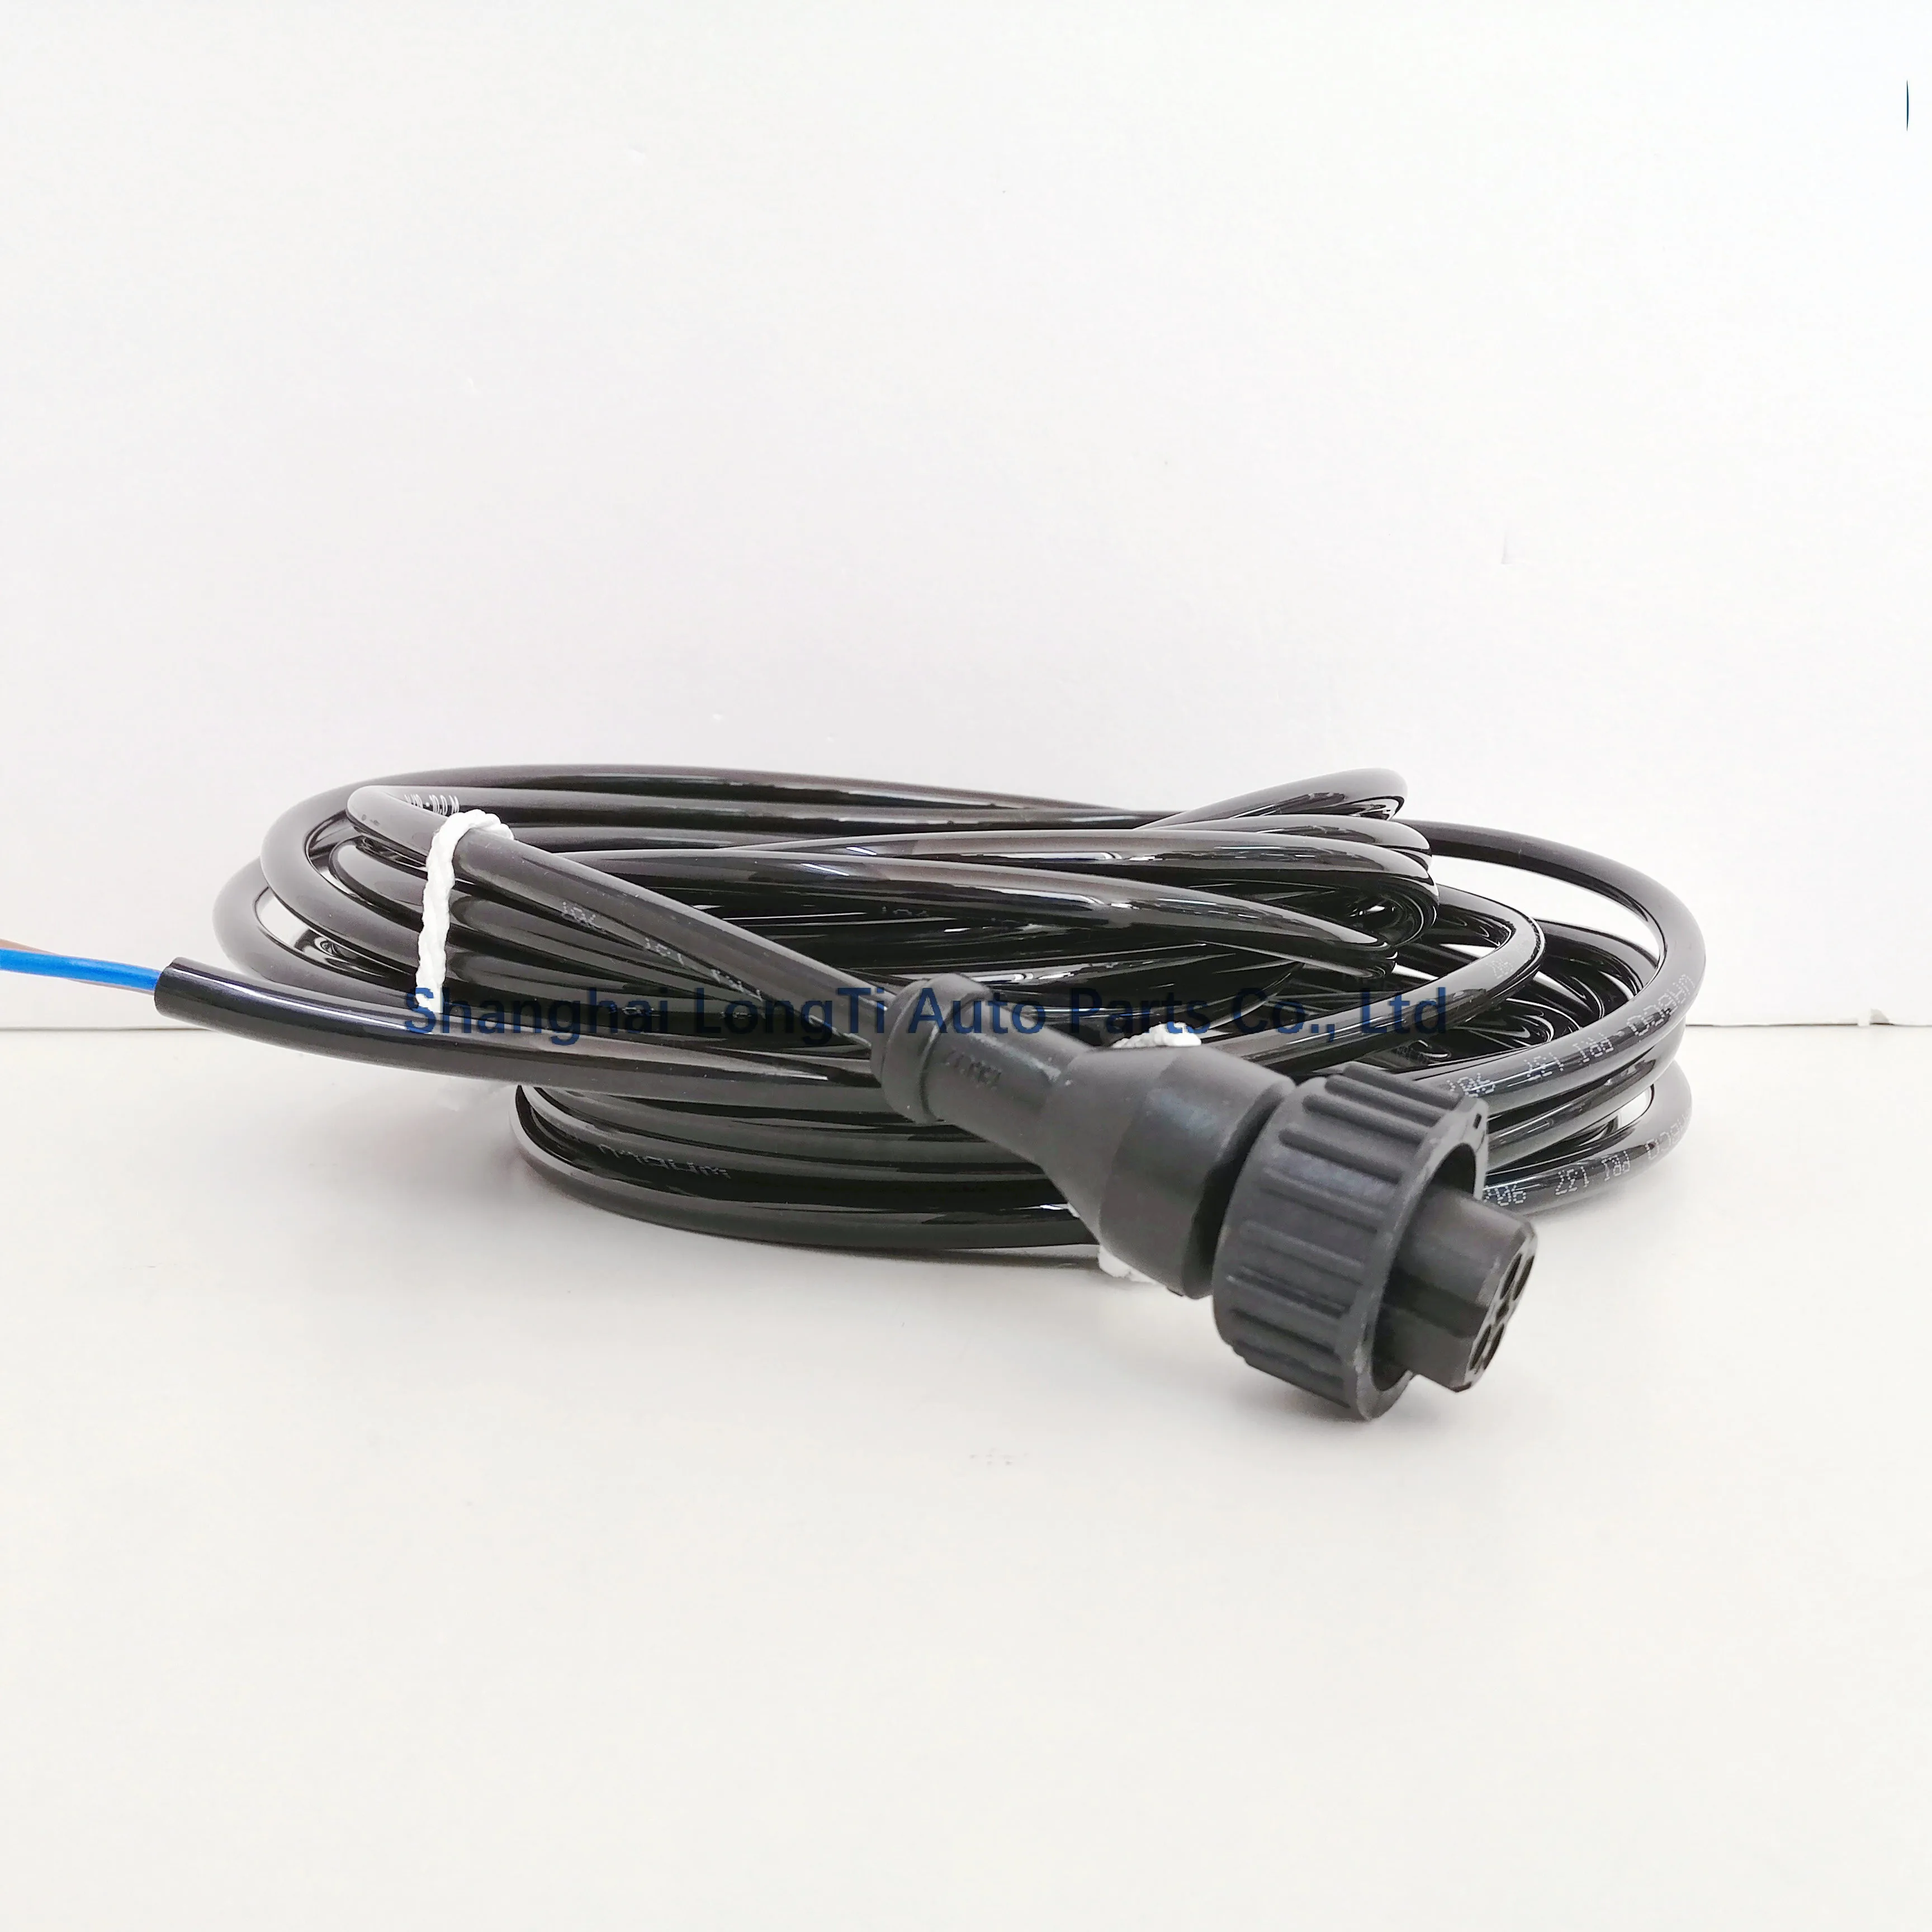 Lowrance 000-0099-83 PC 24U Power Cable